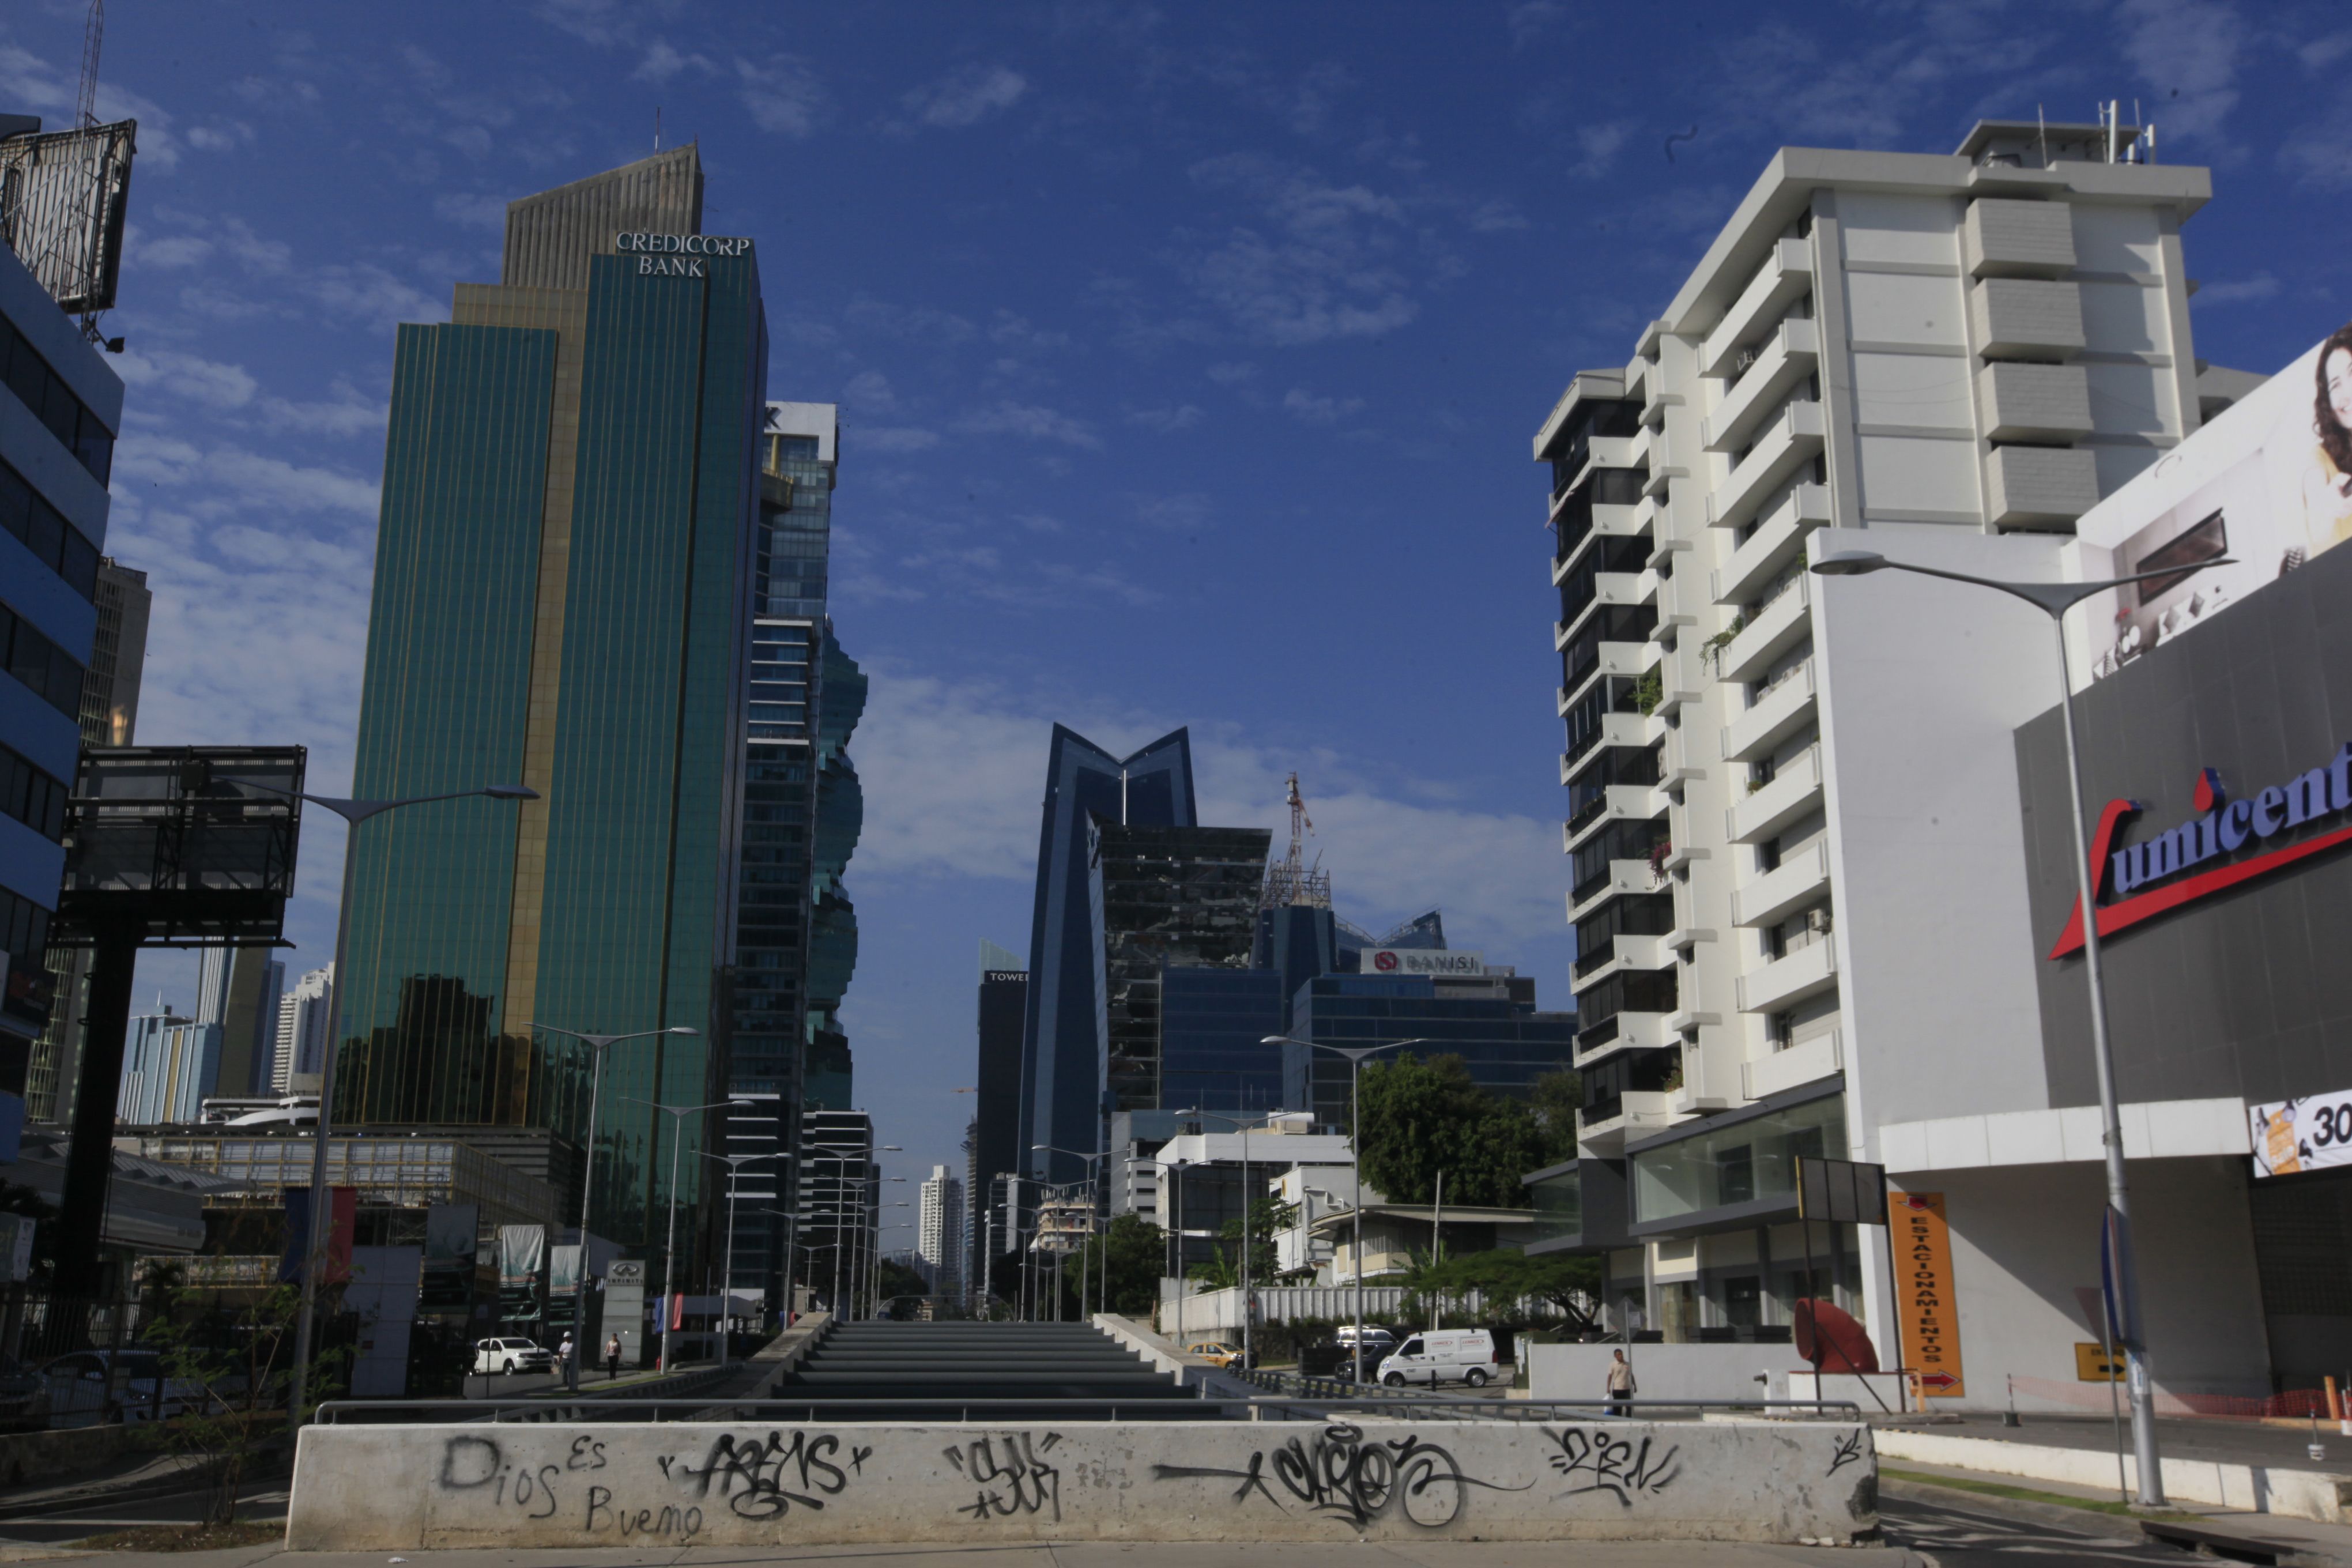 Panamanians on alert for rising interest rates in banks